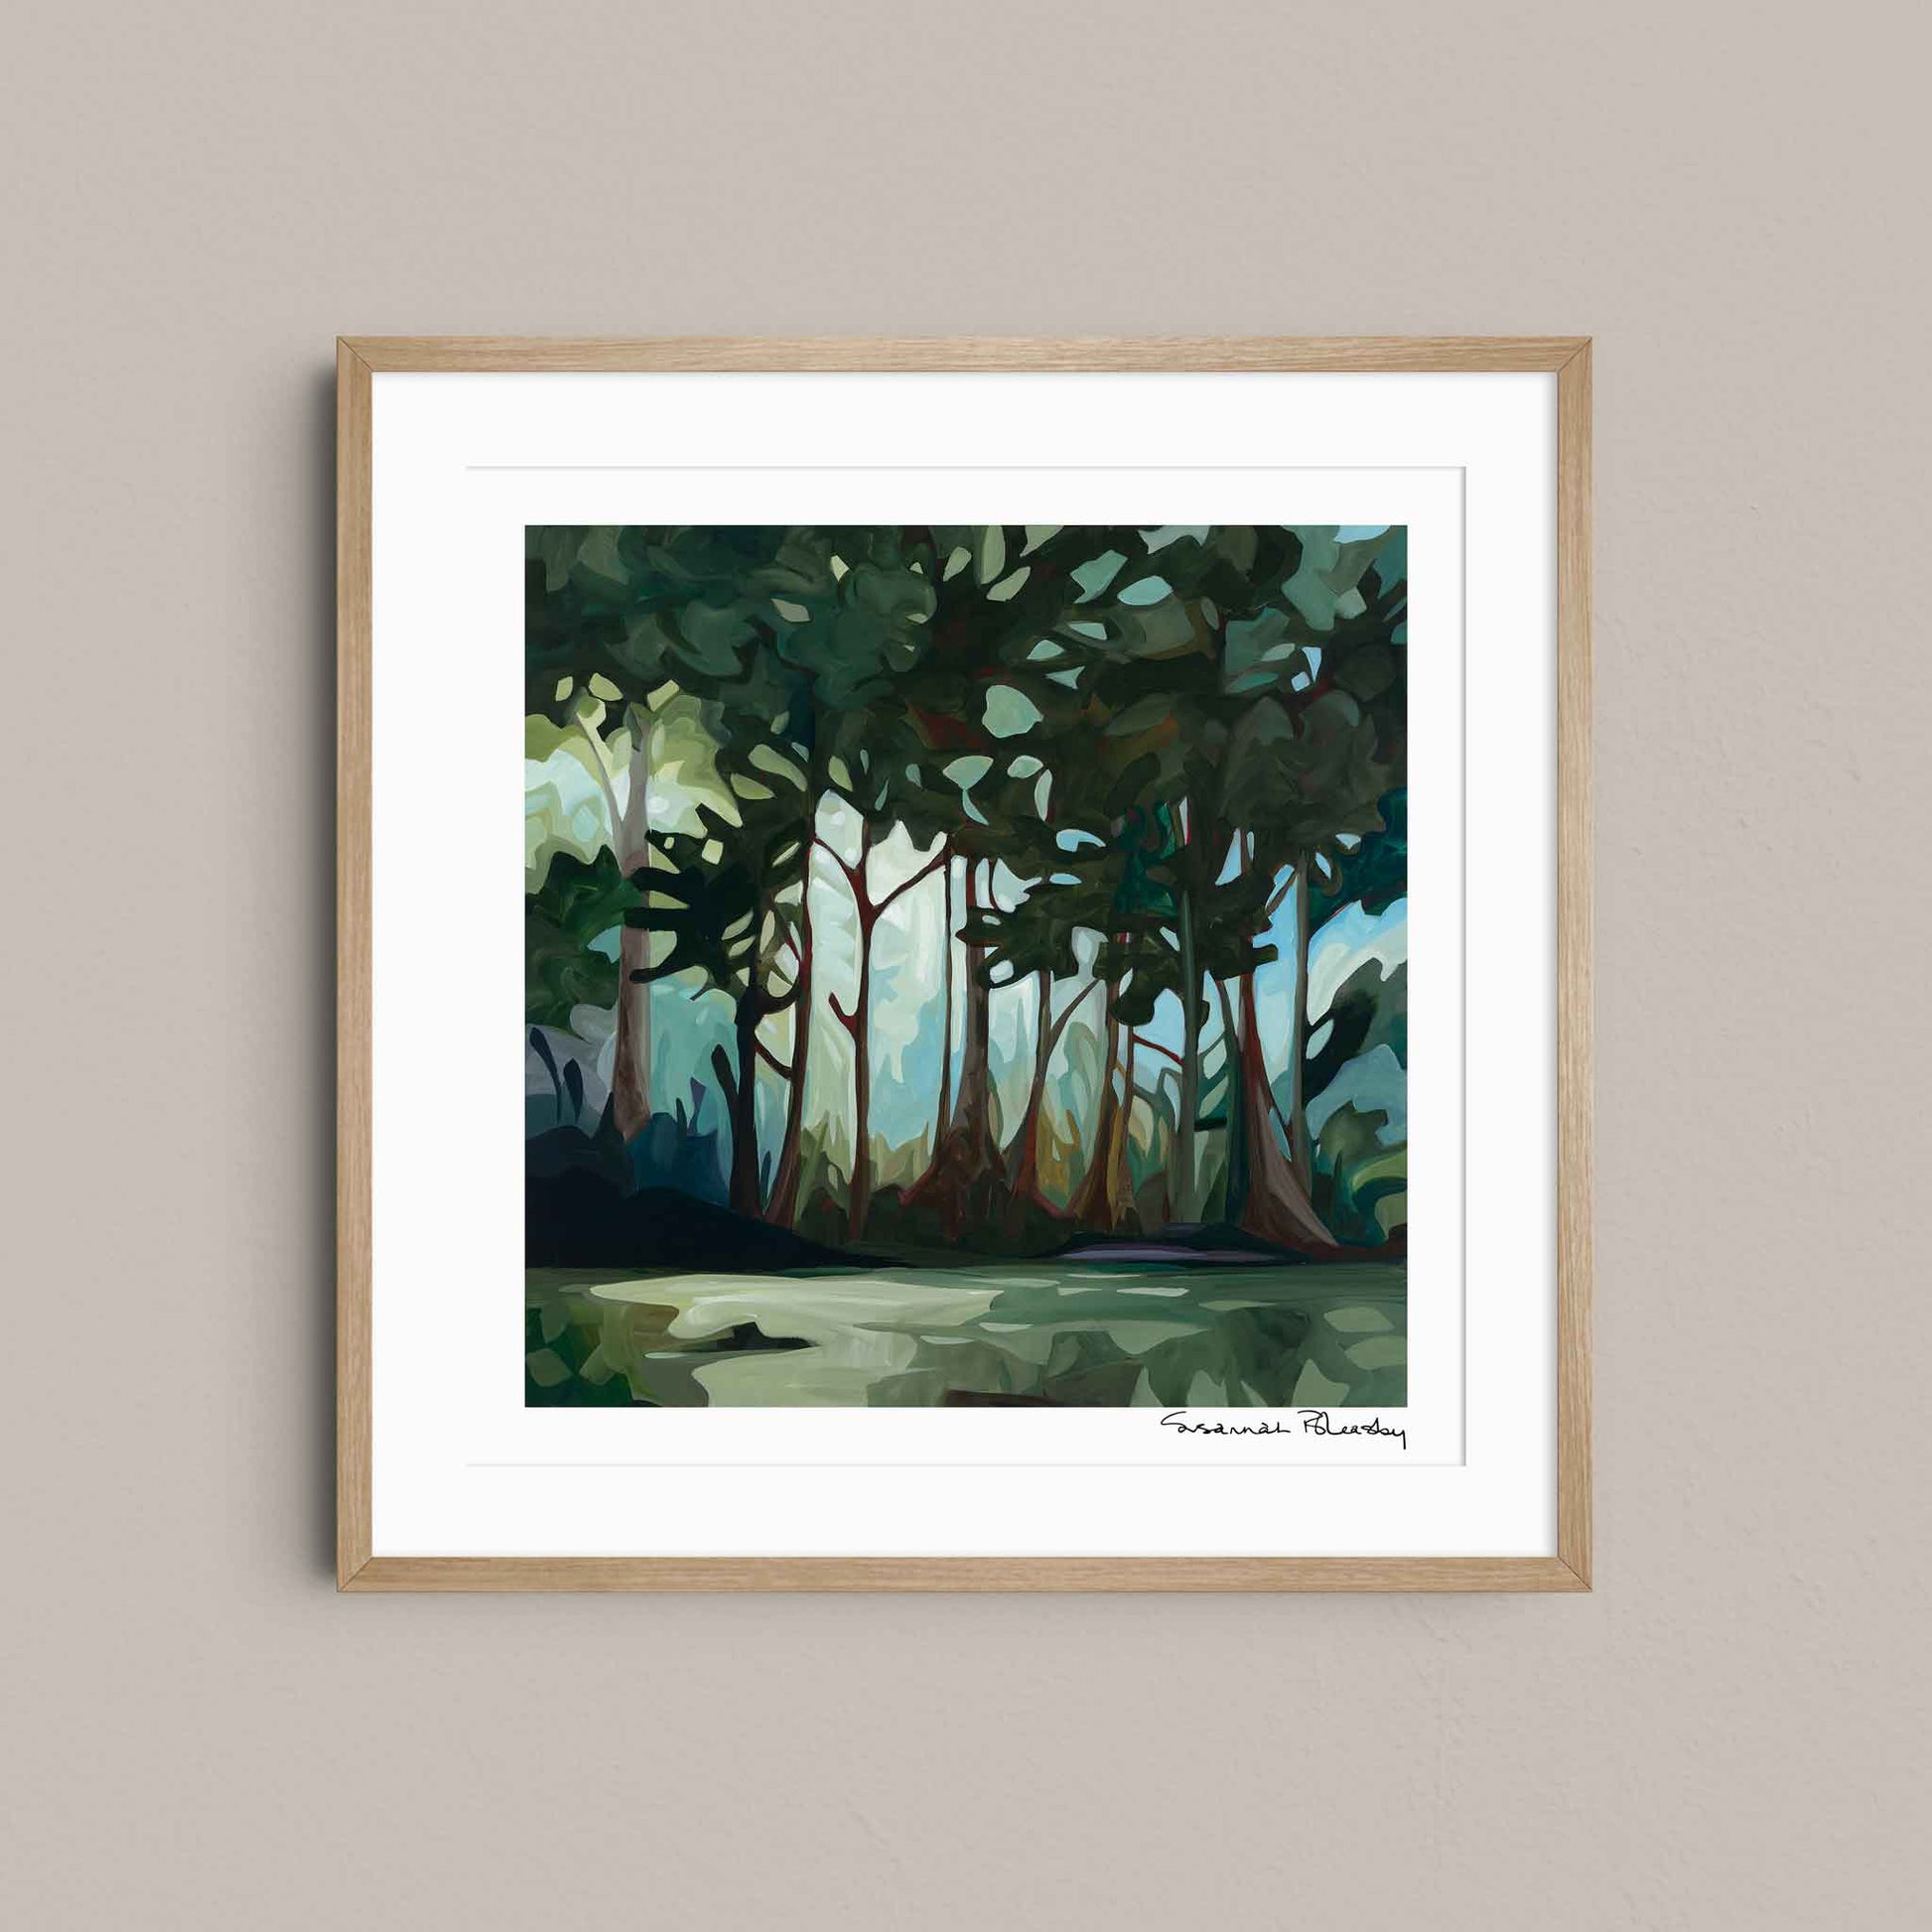 Enjoy nature's beauty and tranquility with Tanglewood, an acrylic landscape painting and art print of a forest park.